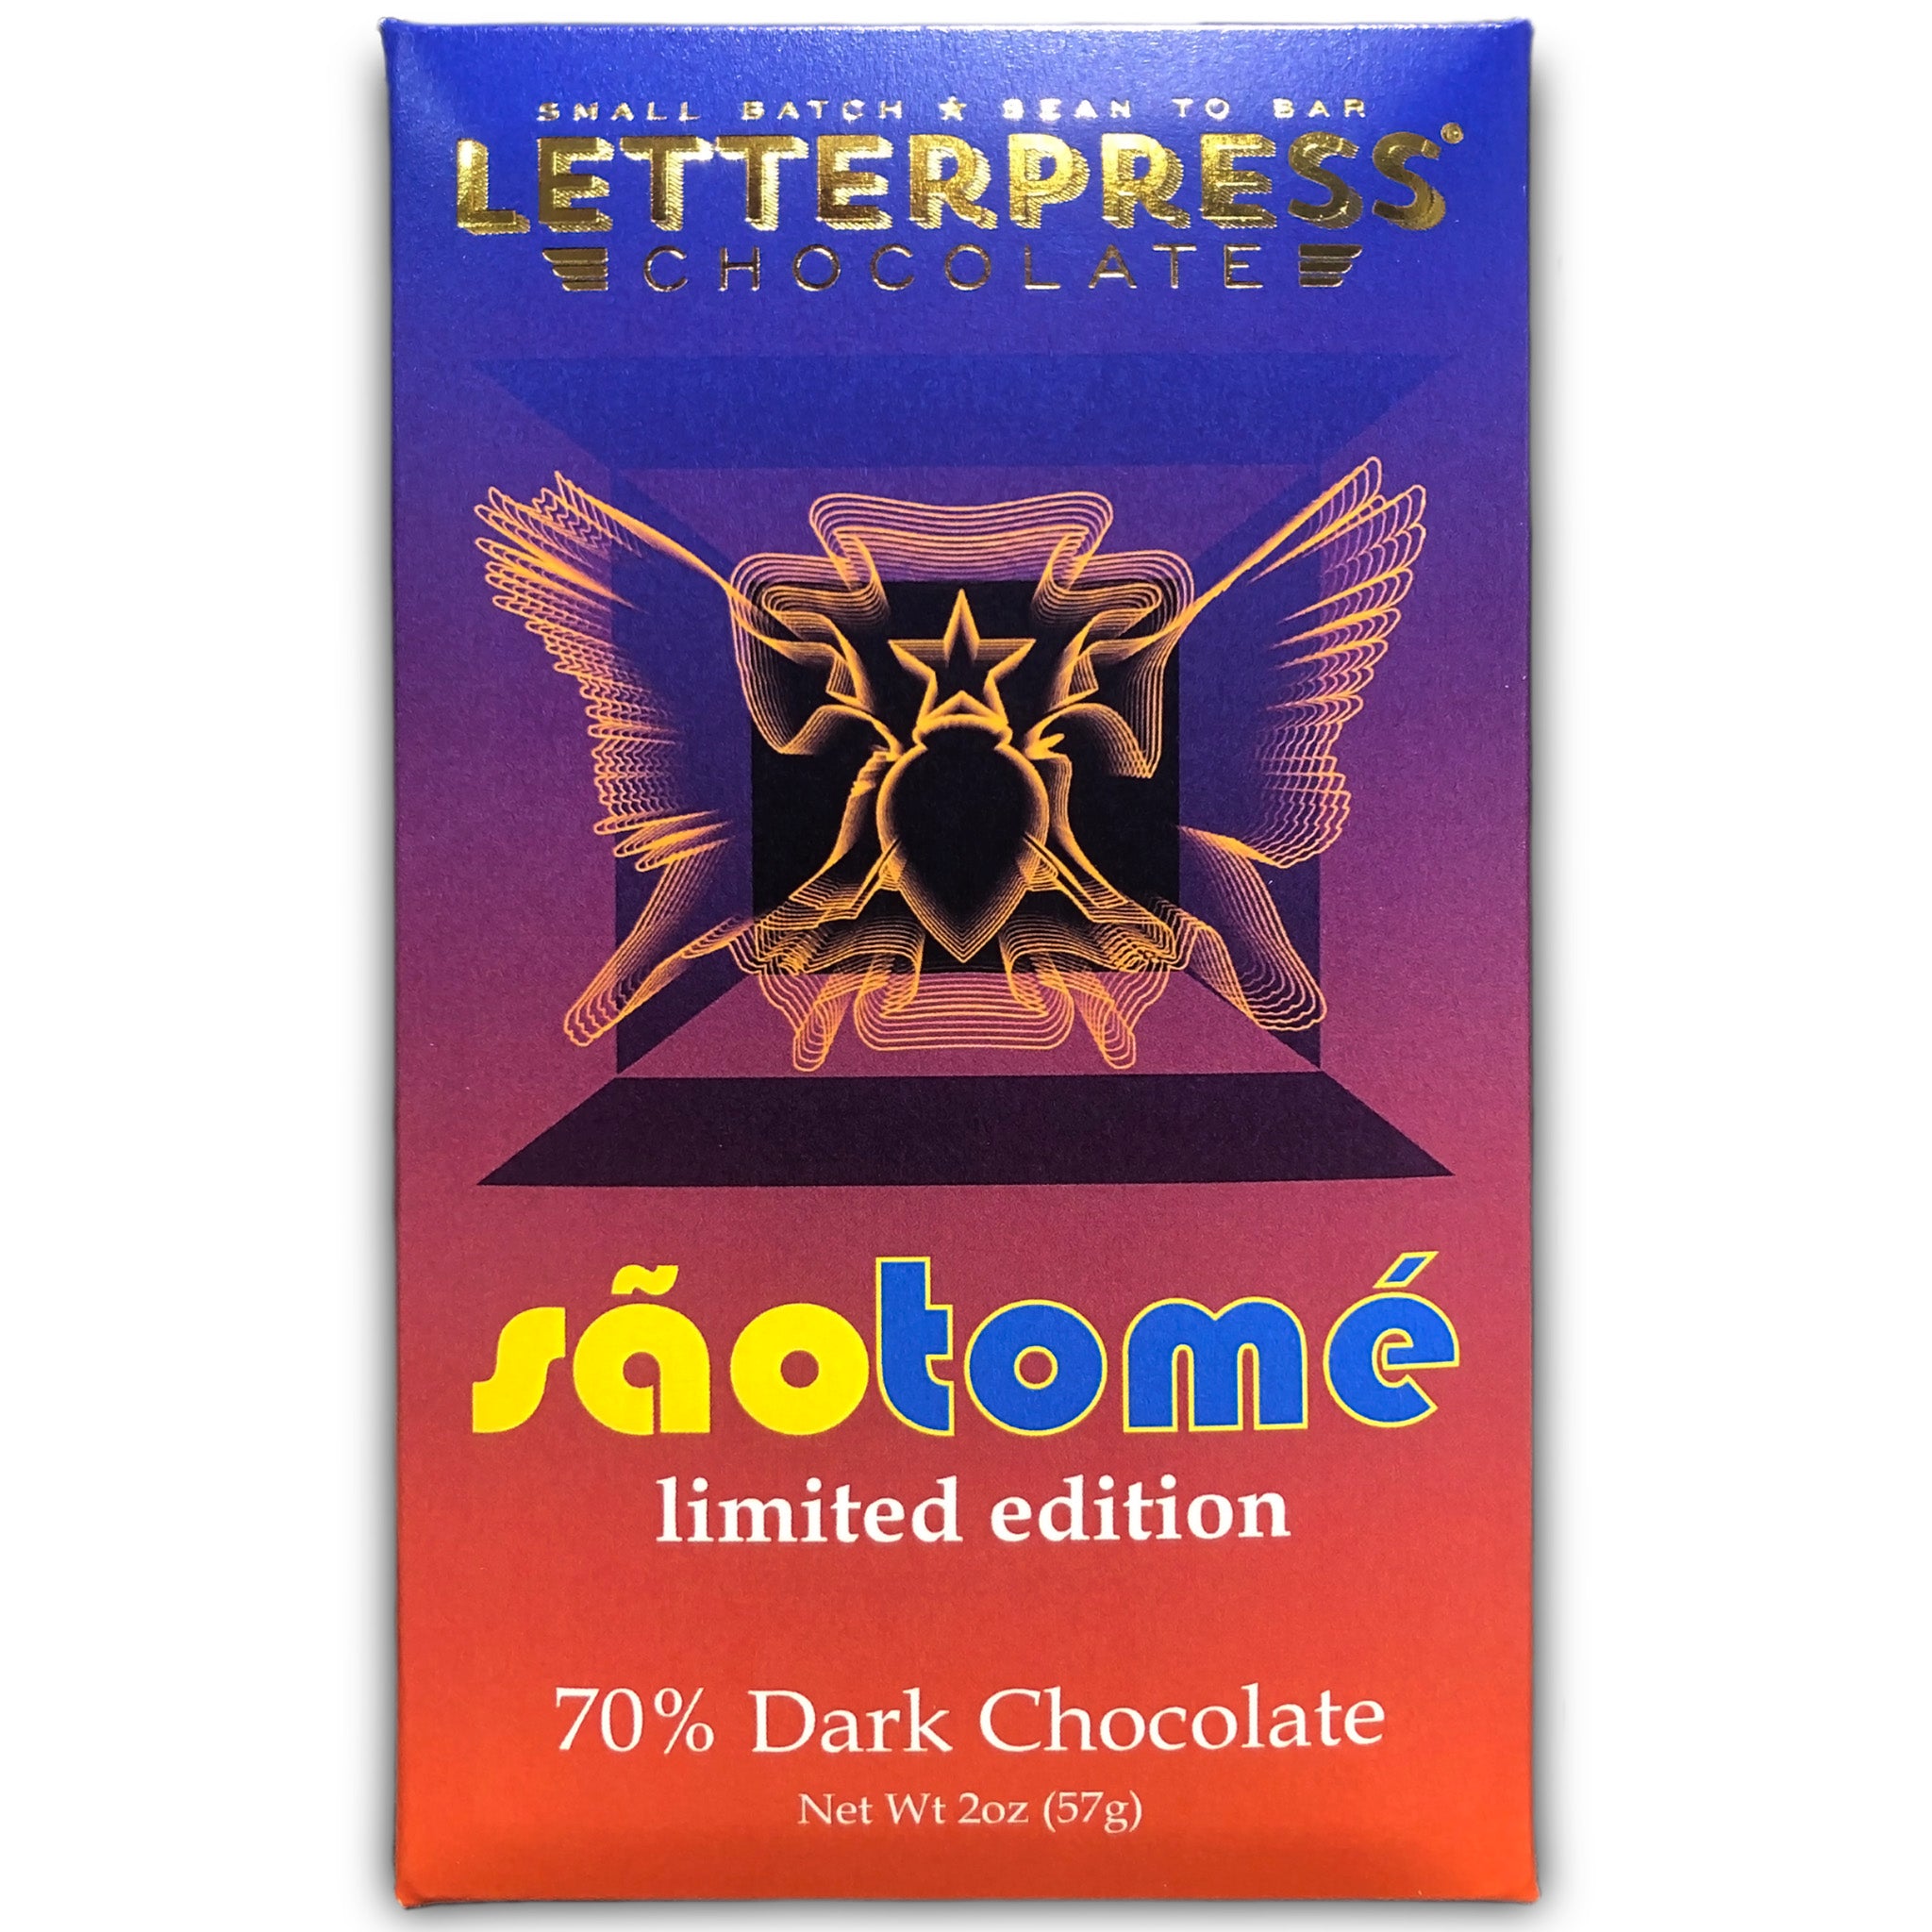 Sao Tome Limited Edition 70% Dark Chocolate packaging on a white background